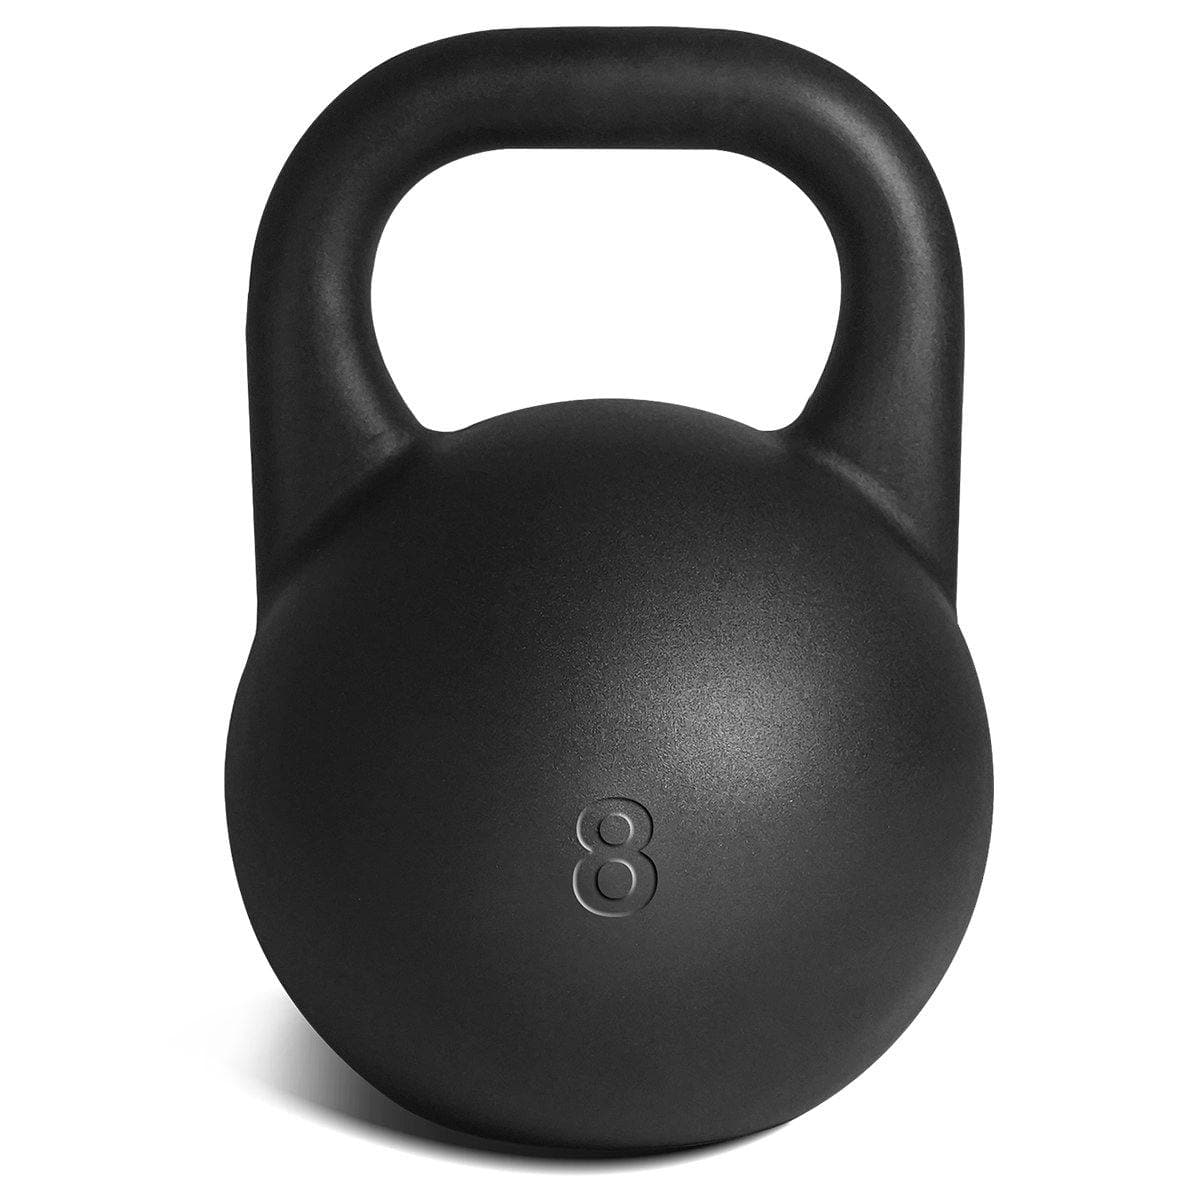 PRO Competition - Steel Kettlebell starting from 8 kg to 32 kg - Musclemania Fitness MegaStore